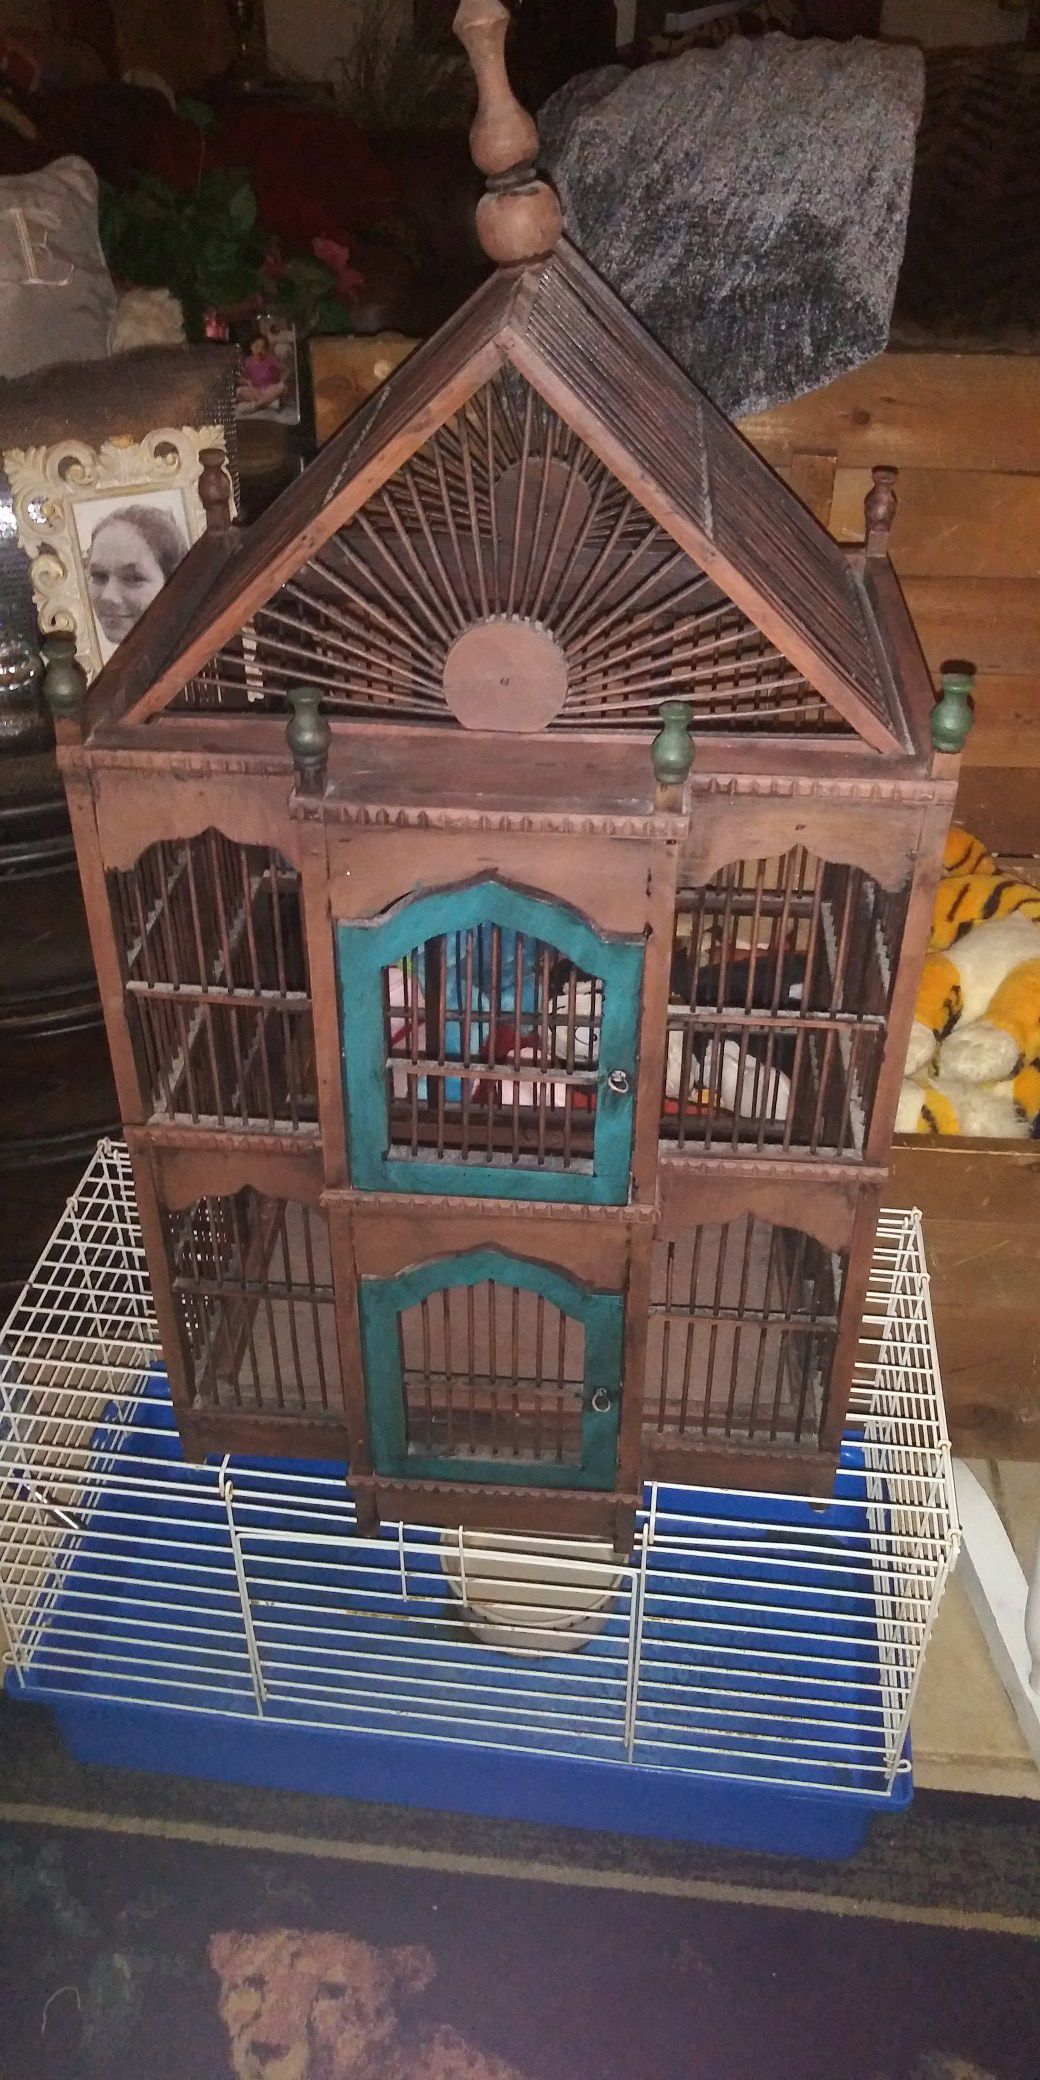 Gorgeous wood 28inht cage 14dol Is Firm lots deals my post go look